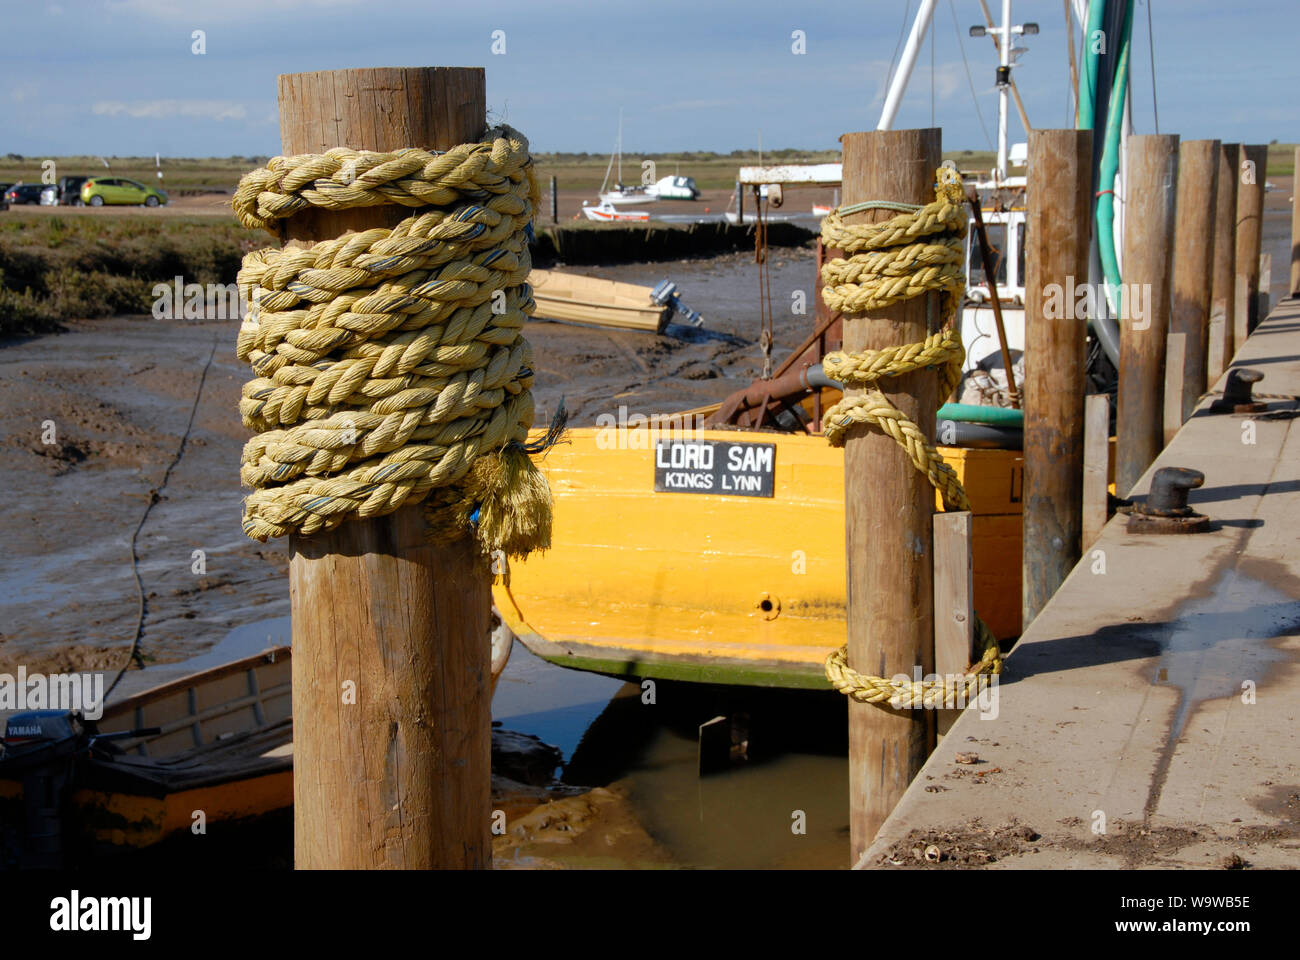 Lord Sam, registered at Kings Lynn, moored at Brancaster Staithe, on the north Norfolk coast, at low tide Stock Photo